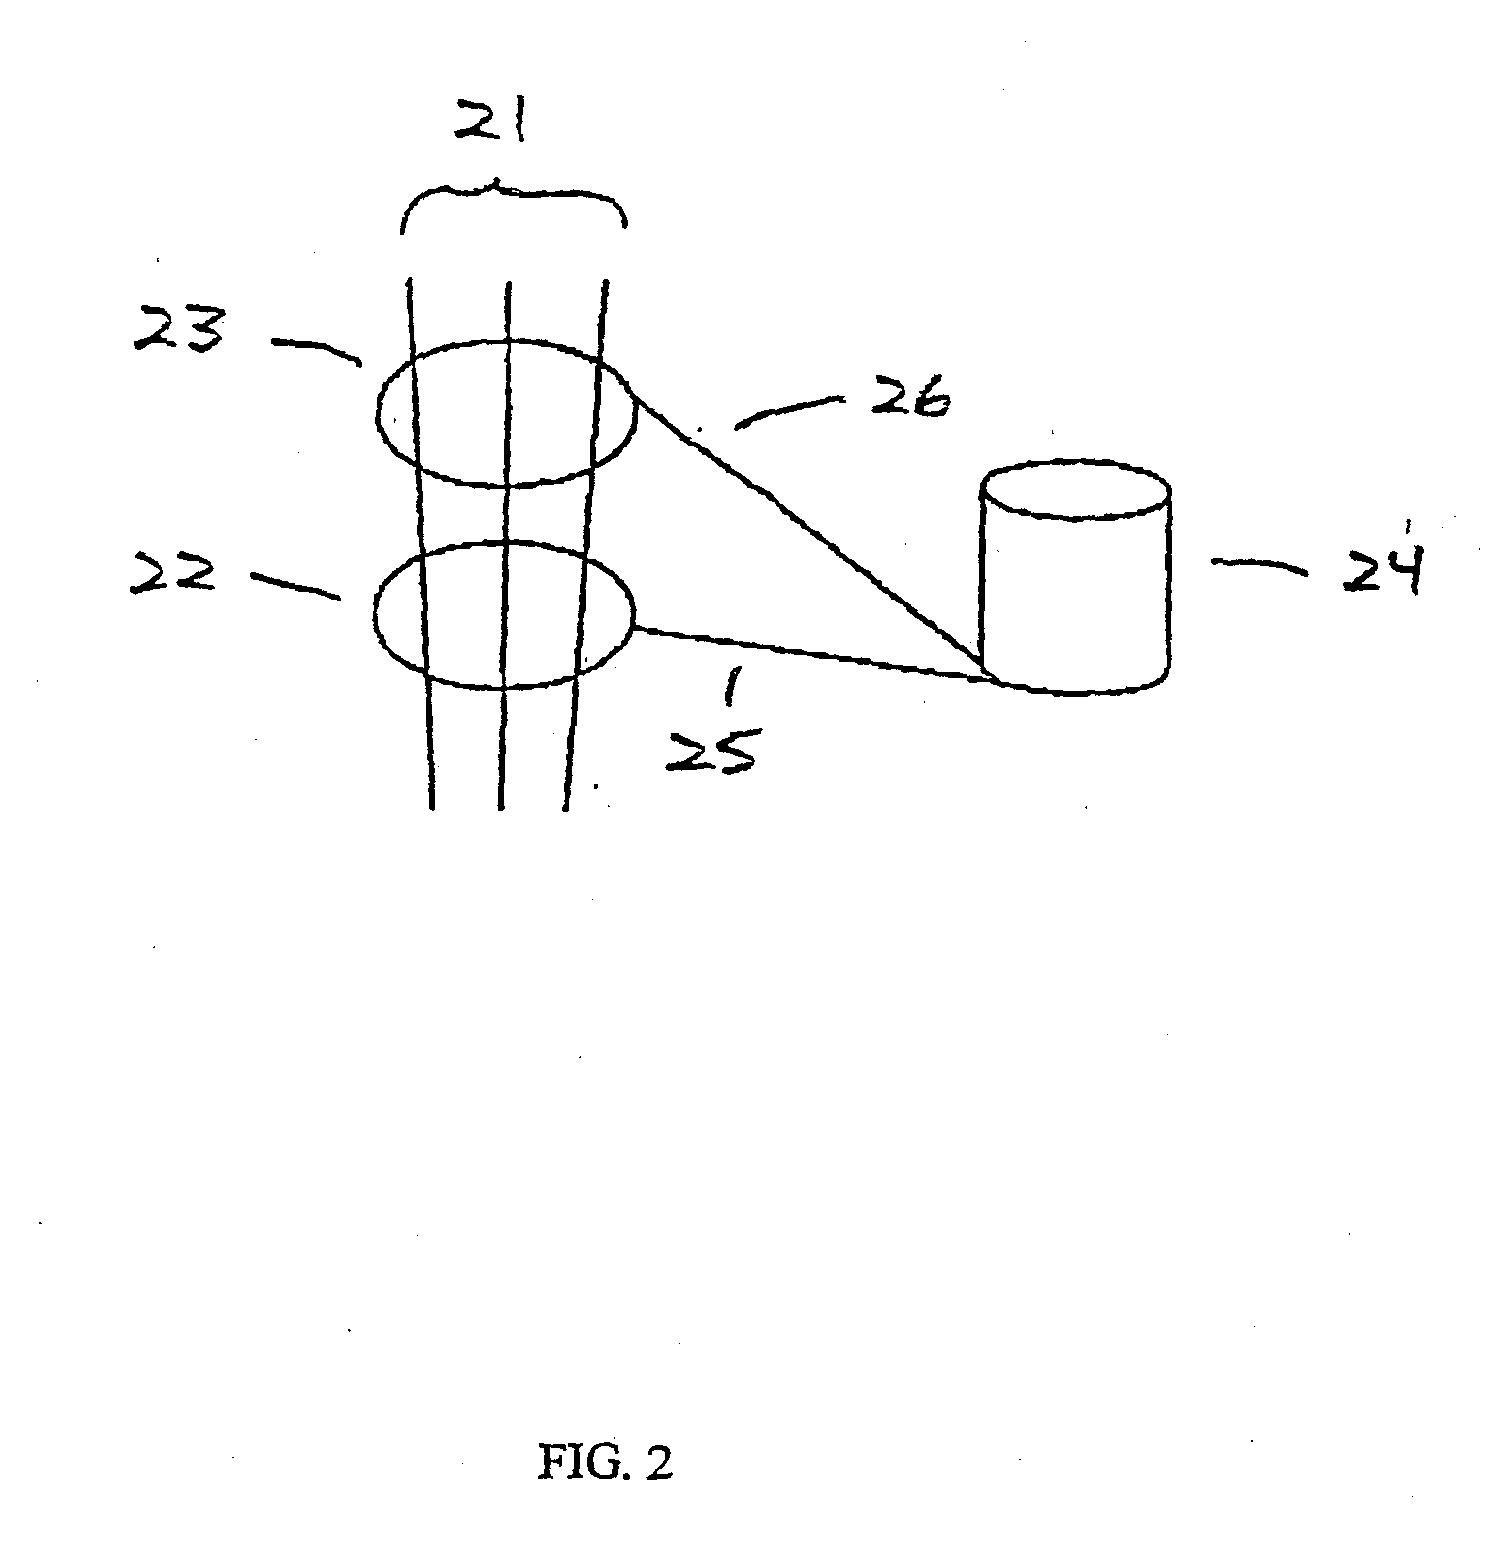 Thermal insulation containing supplemental infrared radiation absorbing material